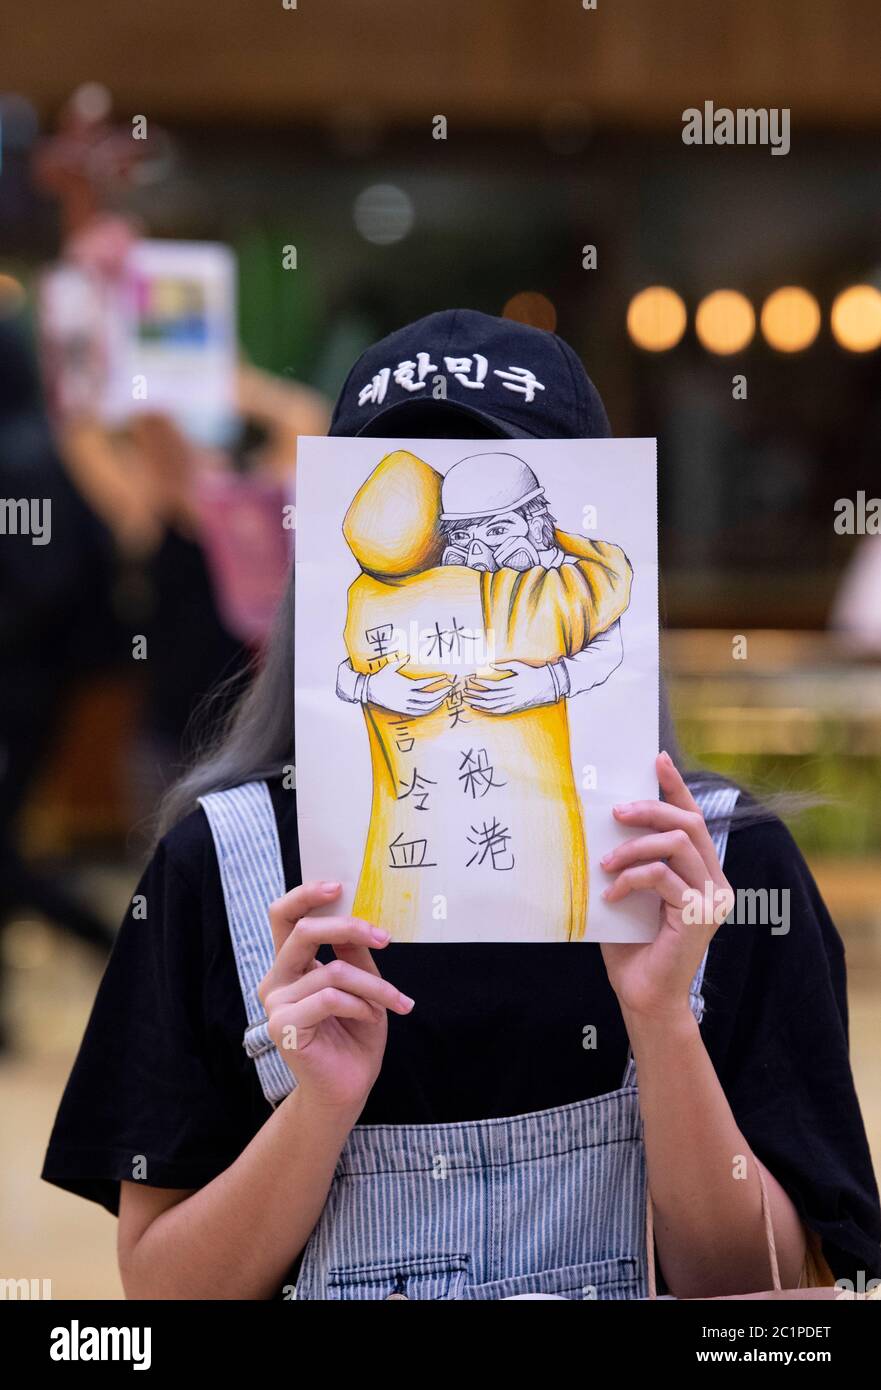 HONG KONG,HONG KONG SAR,CHINA: JUNE 15th 2020. A protester holds up an artwork showing the “raincoat man” in Pacific Place Mall in Admiralty Hong Kong while other wave pro independence signs and sign “Glory to Hong Kong’; the protest anthem. They are there to commemorate the first democracy protesters death on one year ago. Marco Leung fell to his death from scaffolding outside the building on 15th June 2019. He became known as the raincoat man.  Alamy Stock Image/Jayne Russell Stock Photo